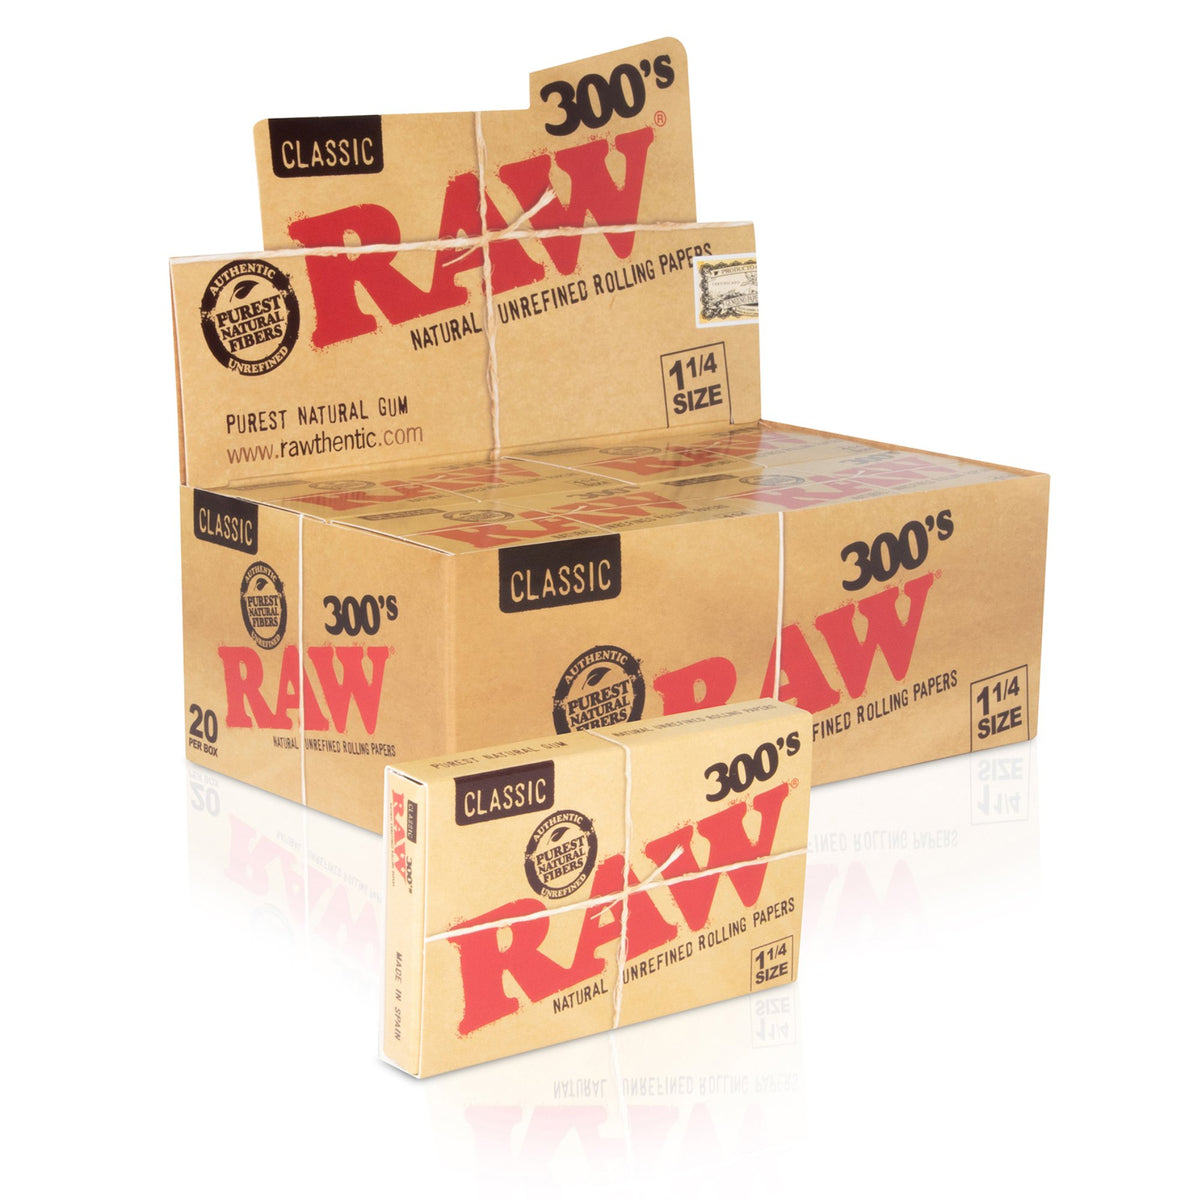 RAW Classic Creaseless 1 1/4 Rolling Papers - 300 Rolling Papers WAR00327-MUSA01 esd-official